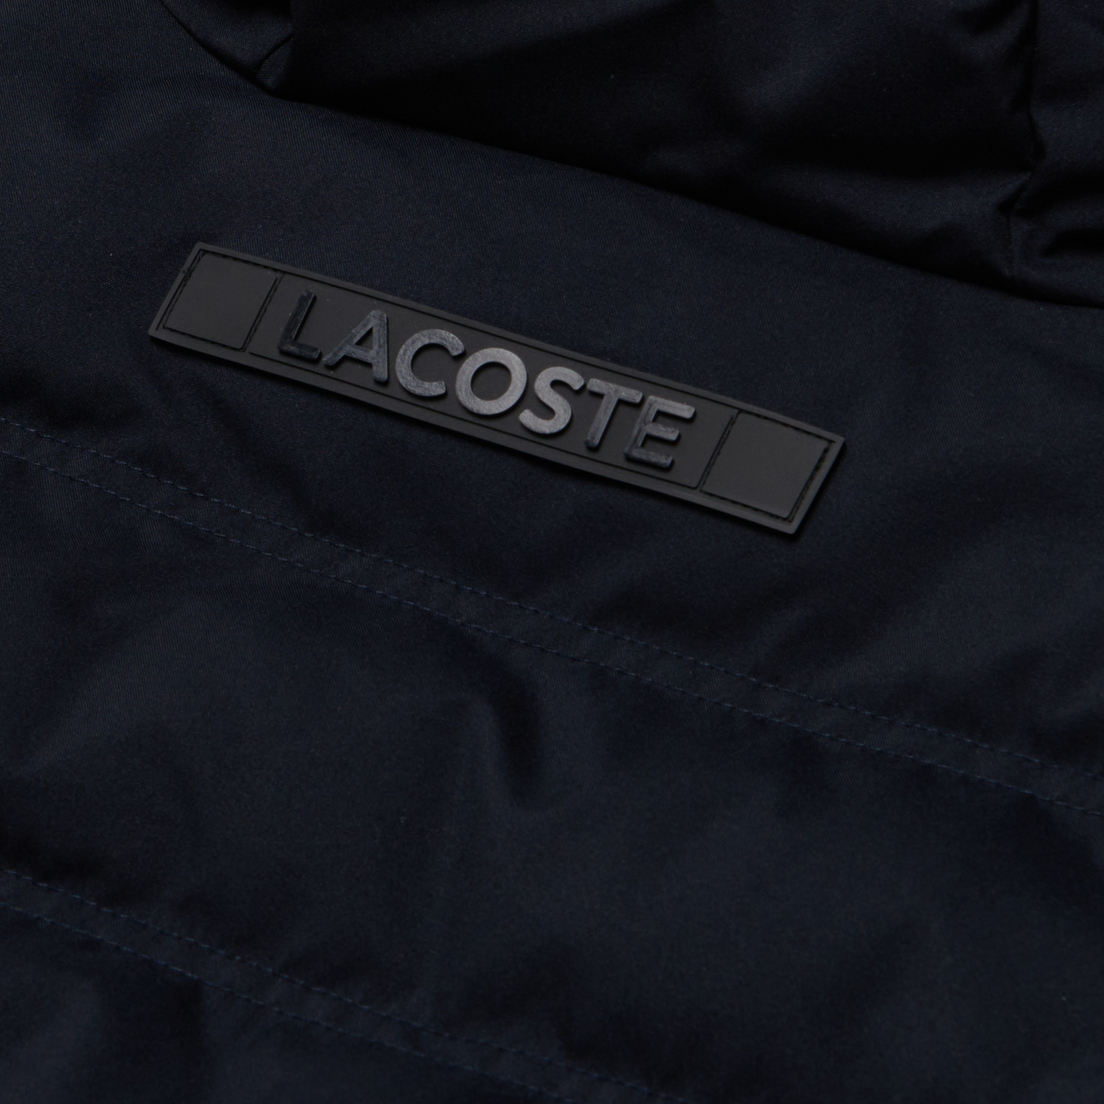 Lacoste Мужской пуховик Quilted Hooded